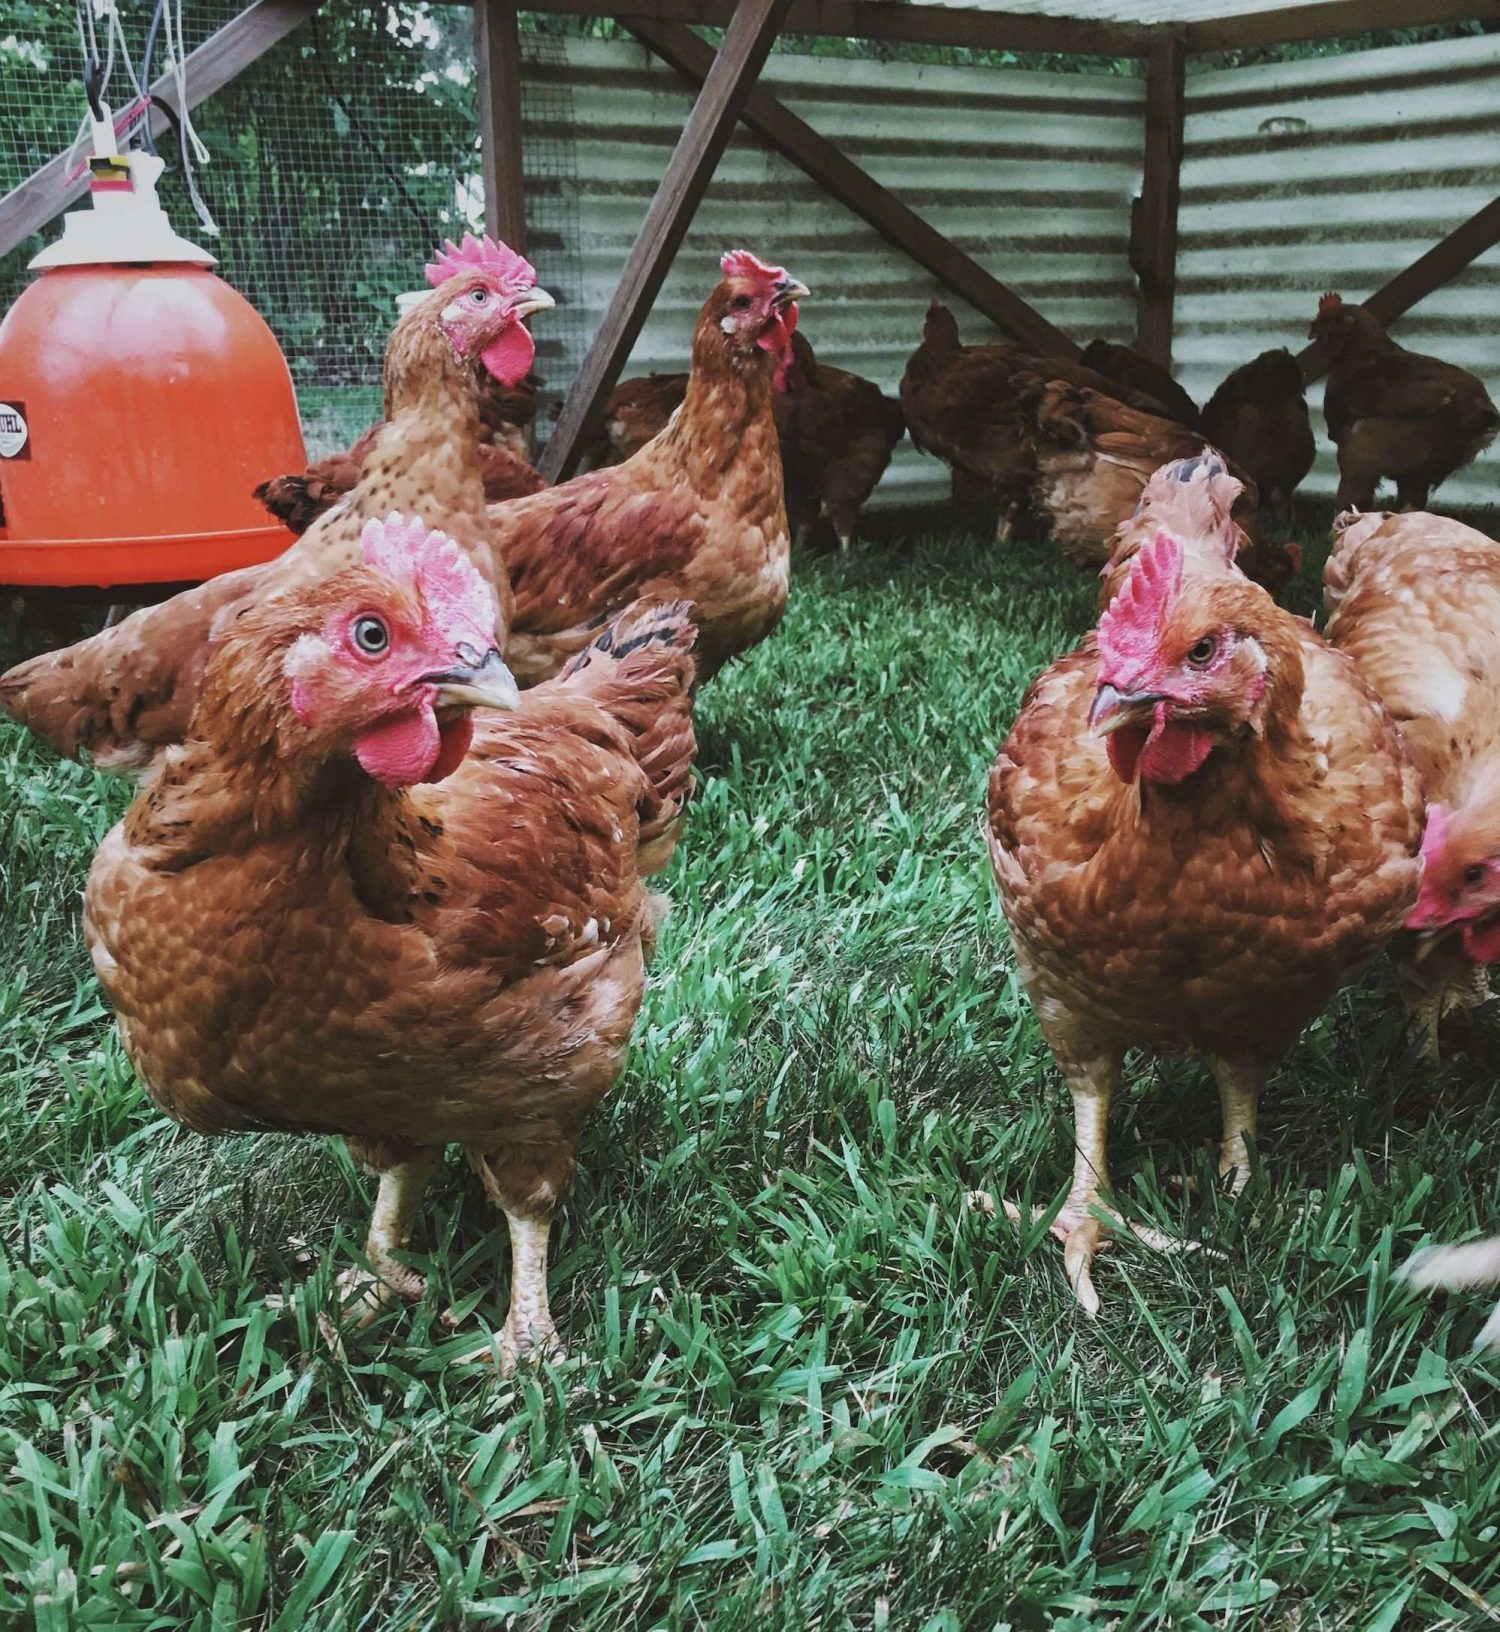 Several brown roosters looking at the camera. They are inside a chicken tractor and standing on grass.